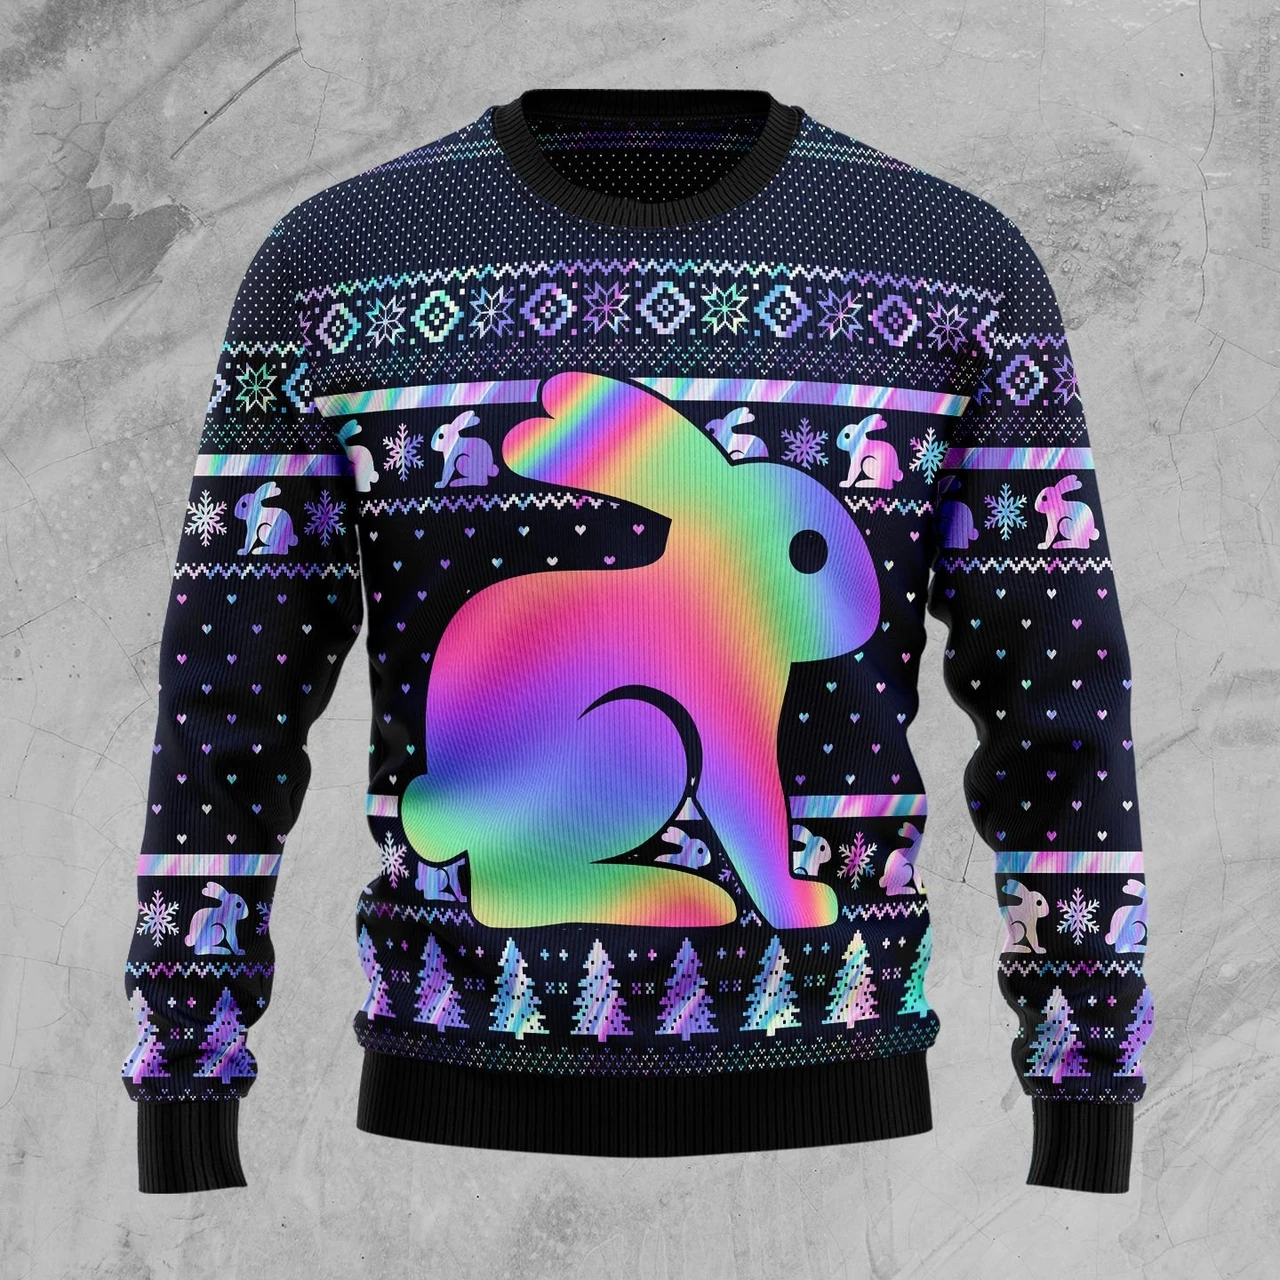 Cute Colorful Rabbit Sweater, Ugly Sweater For Men & Women, Perfect Outfit For Christmas New Year Autumn Winter